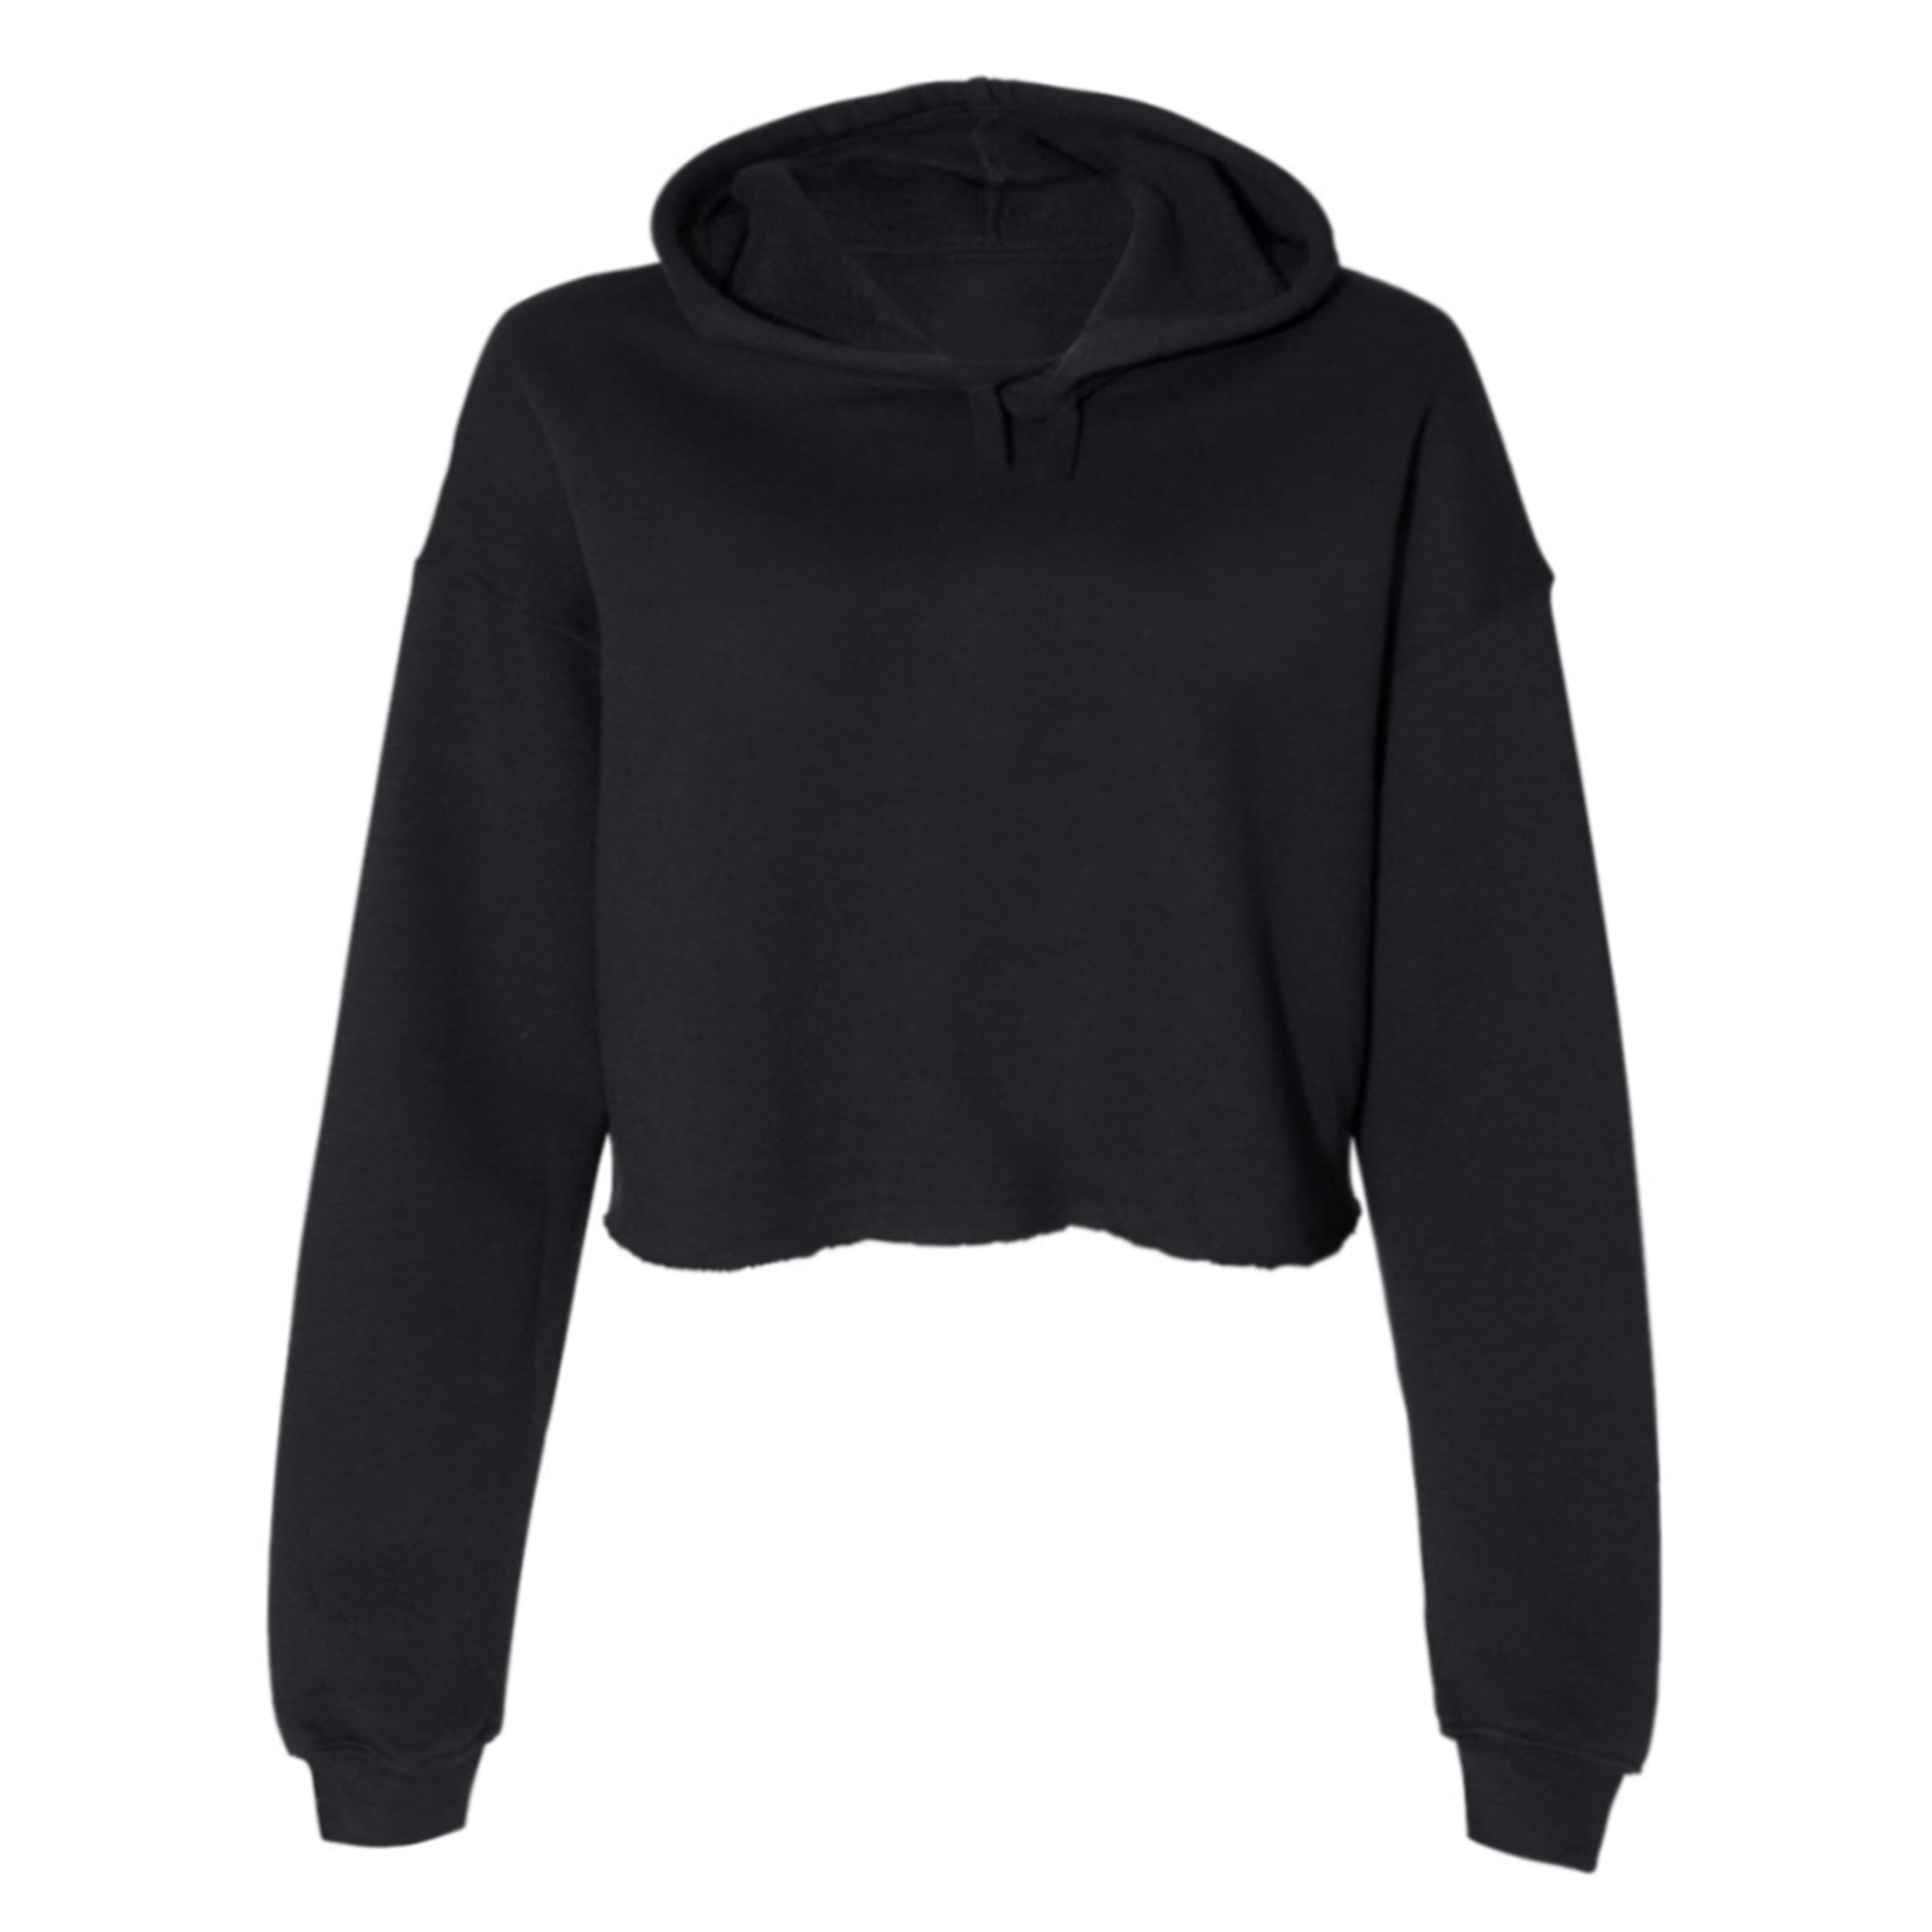 Women’s Lightweight Cropped Hoodie Independent Trading Co - AFX64CRP ...